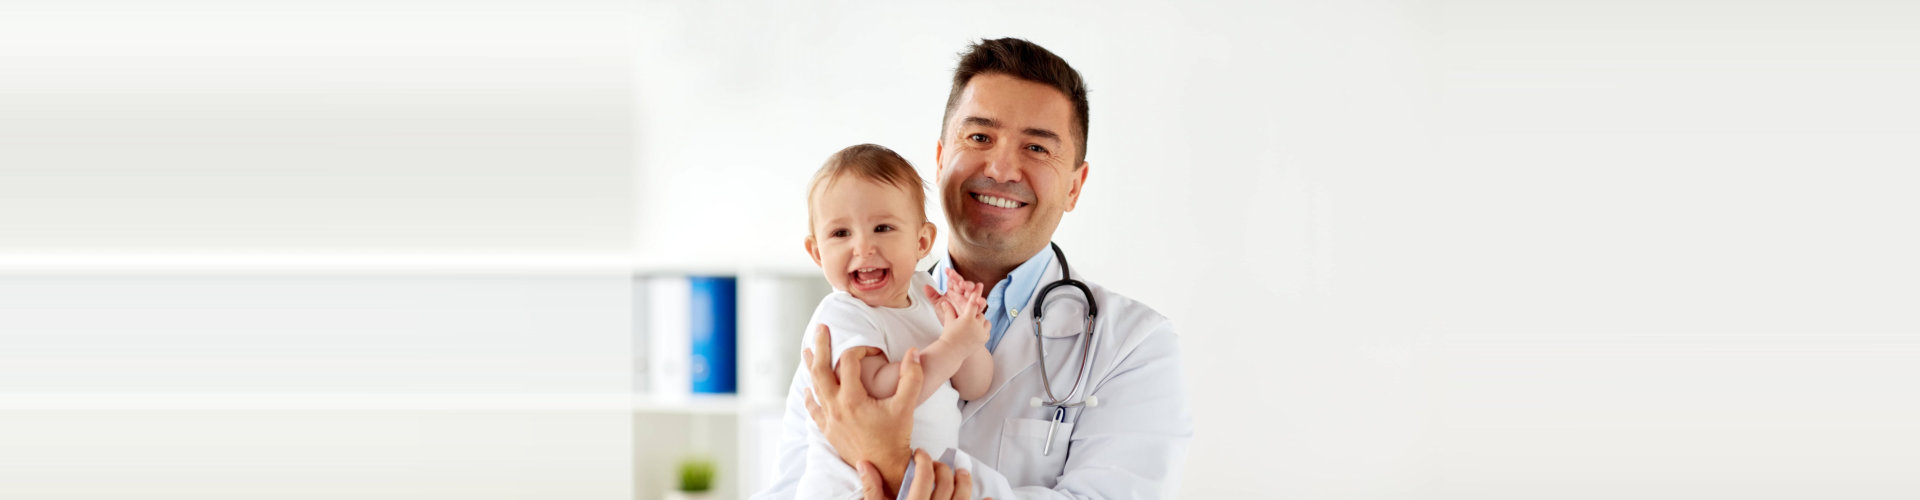 doctor and a kid smiling